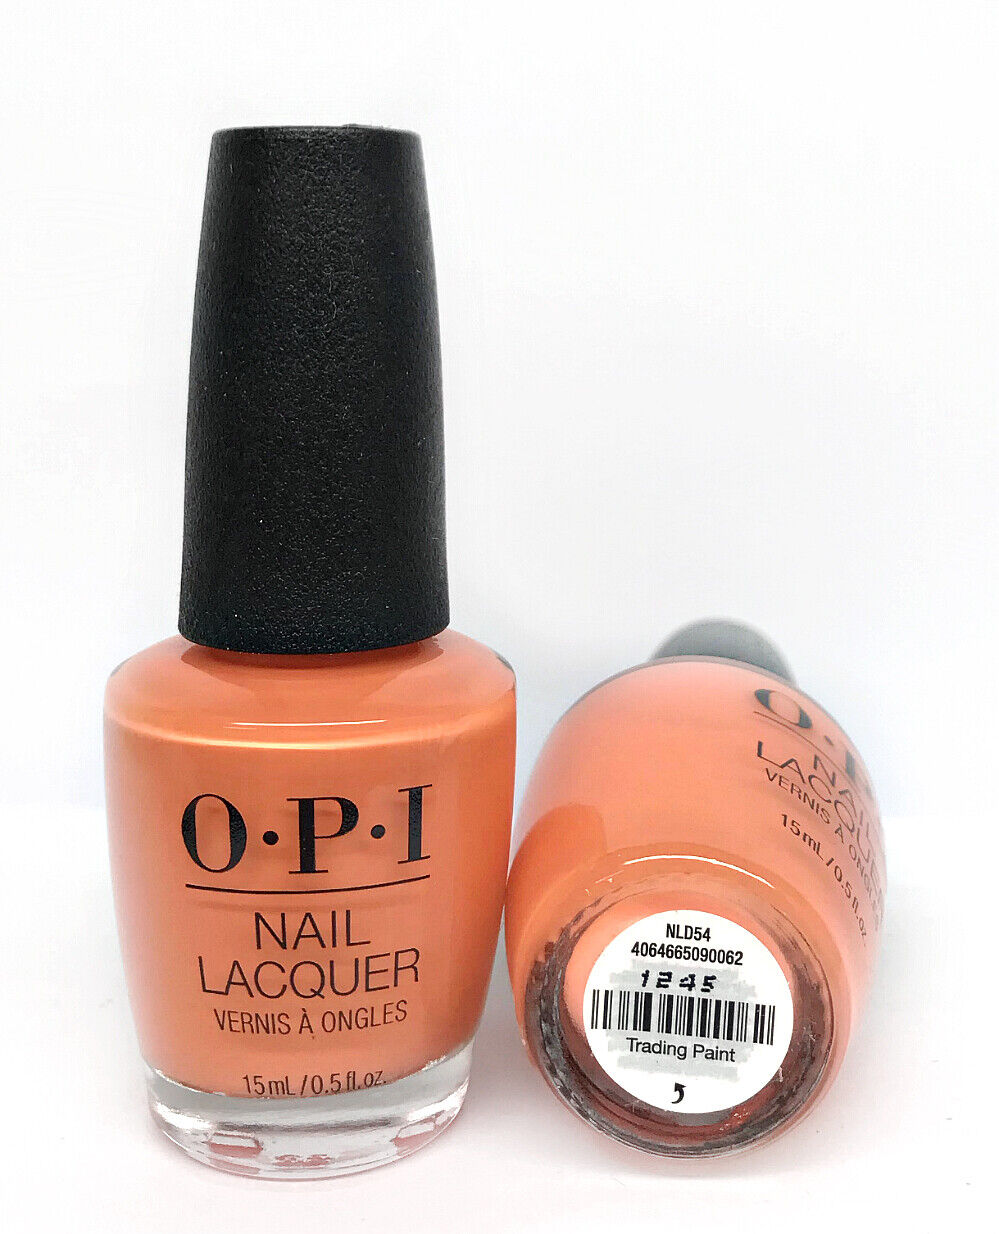 OPI Nail Lacquer Trading Paint 0.5 oz #NLD54